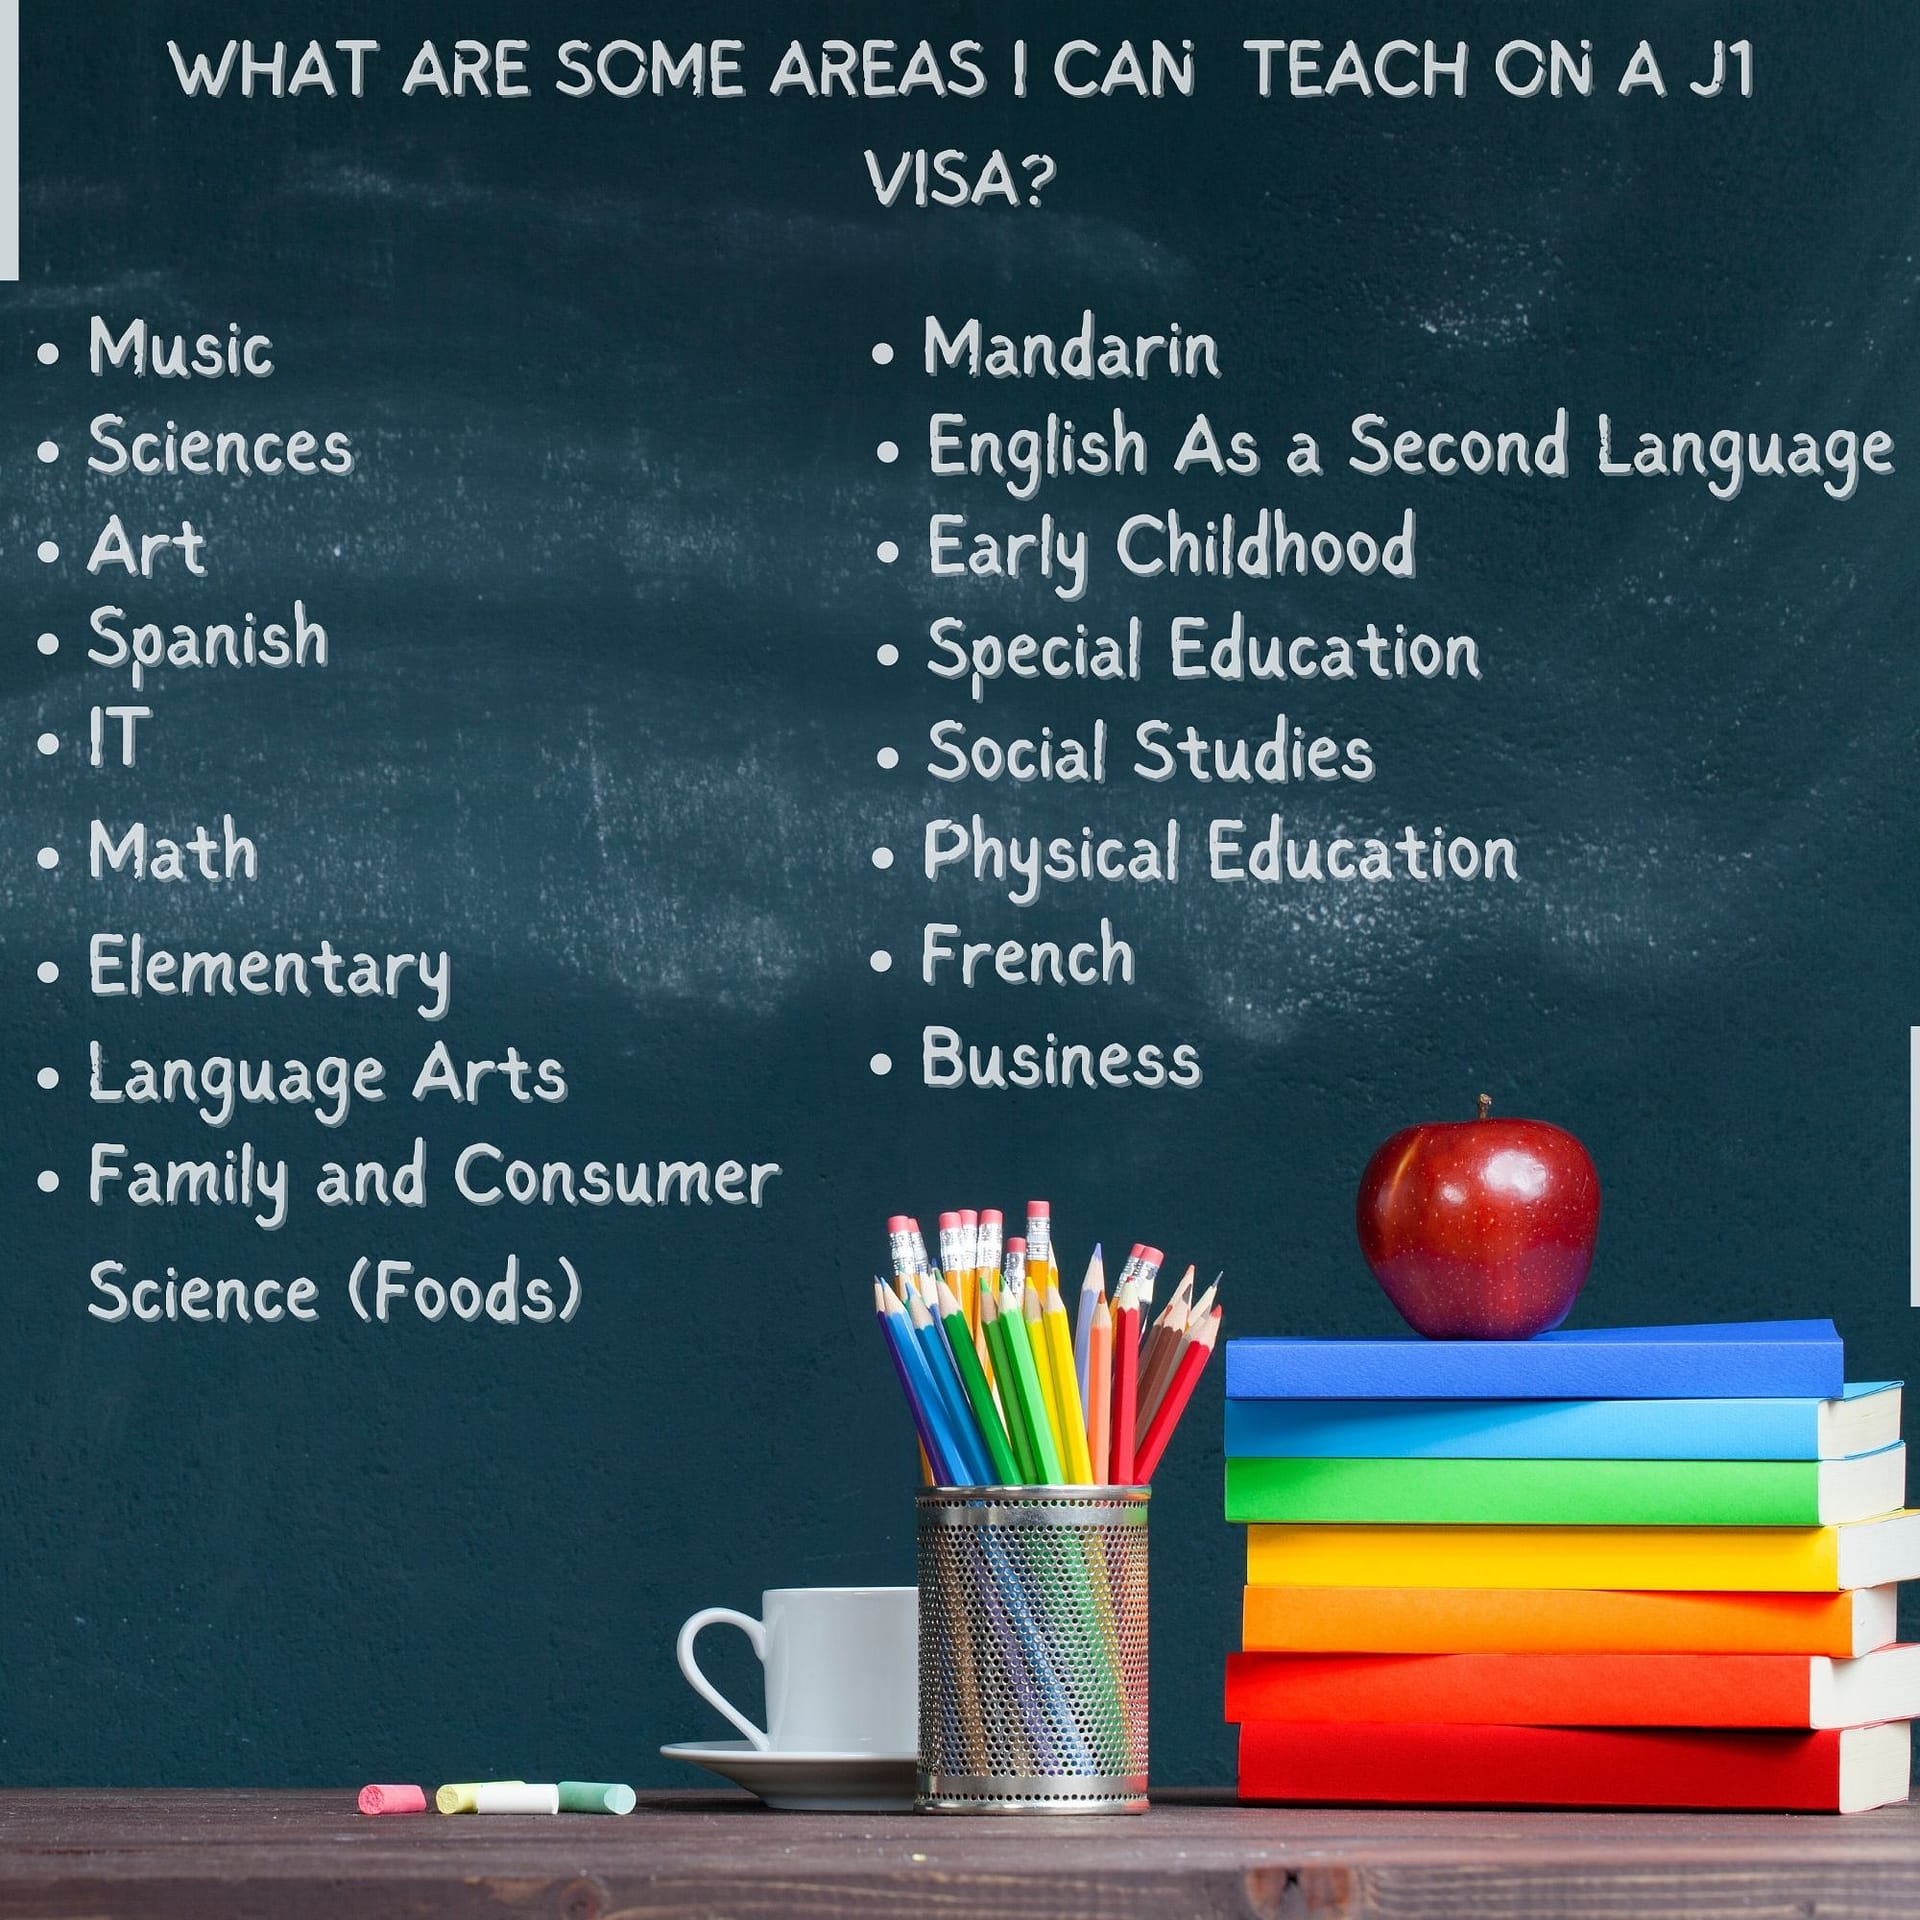 Subject areas ypu can teach in the US on a J1